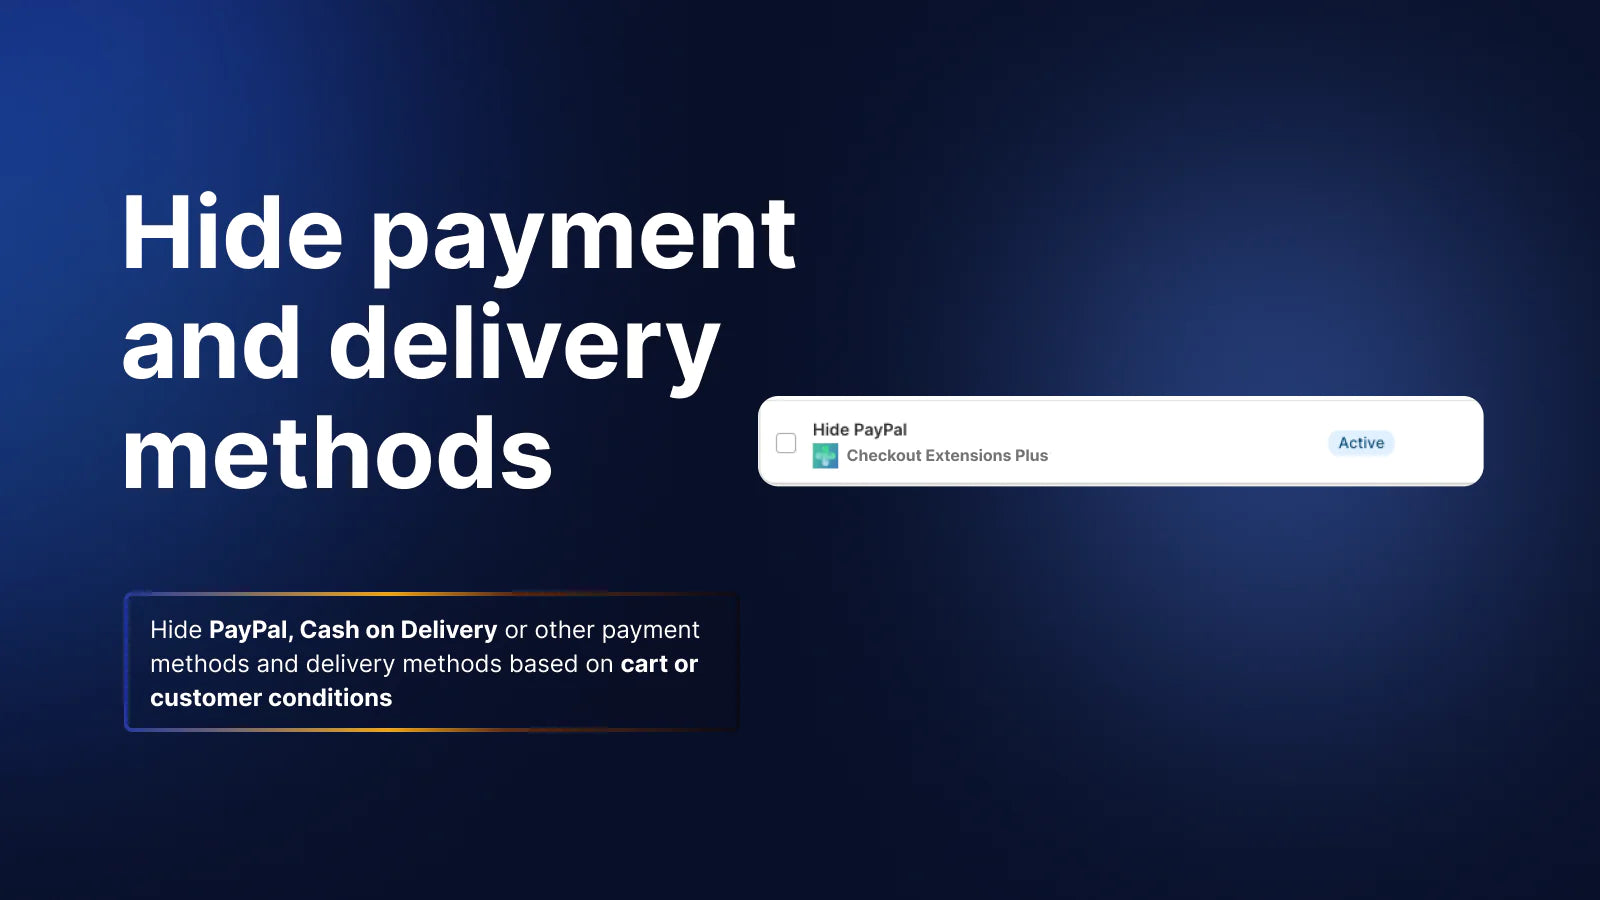 the image shows that you can hide payment and delivery methods